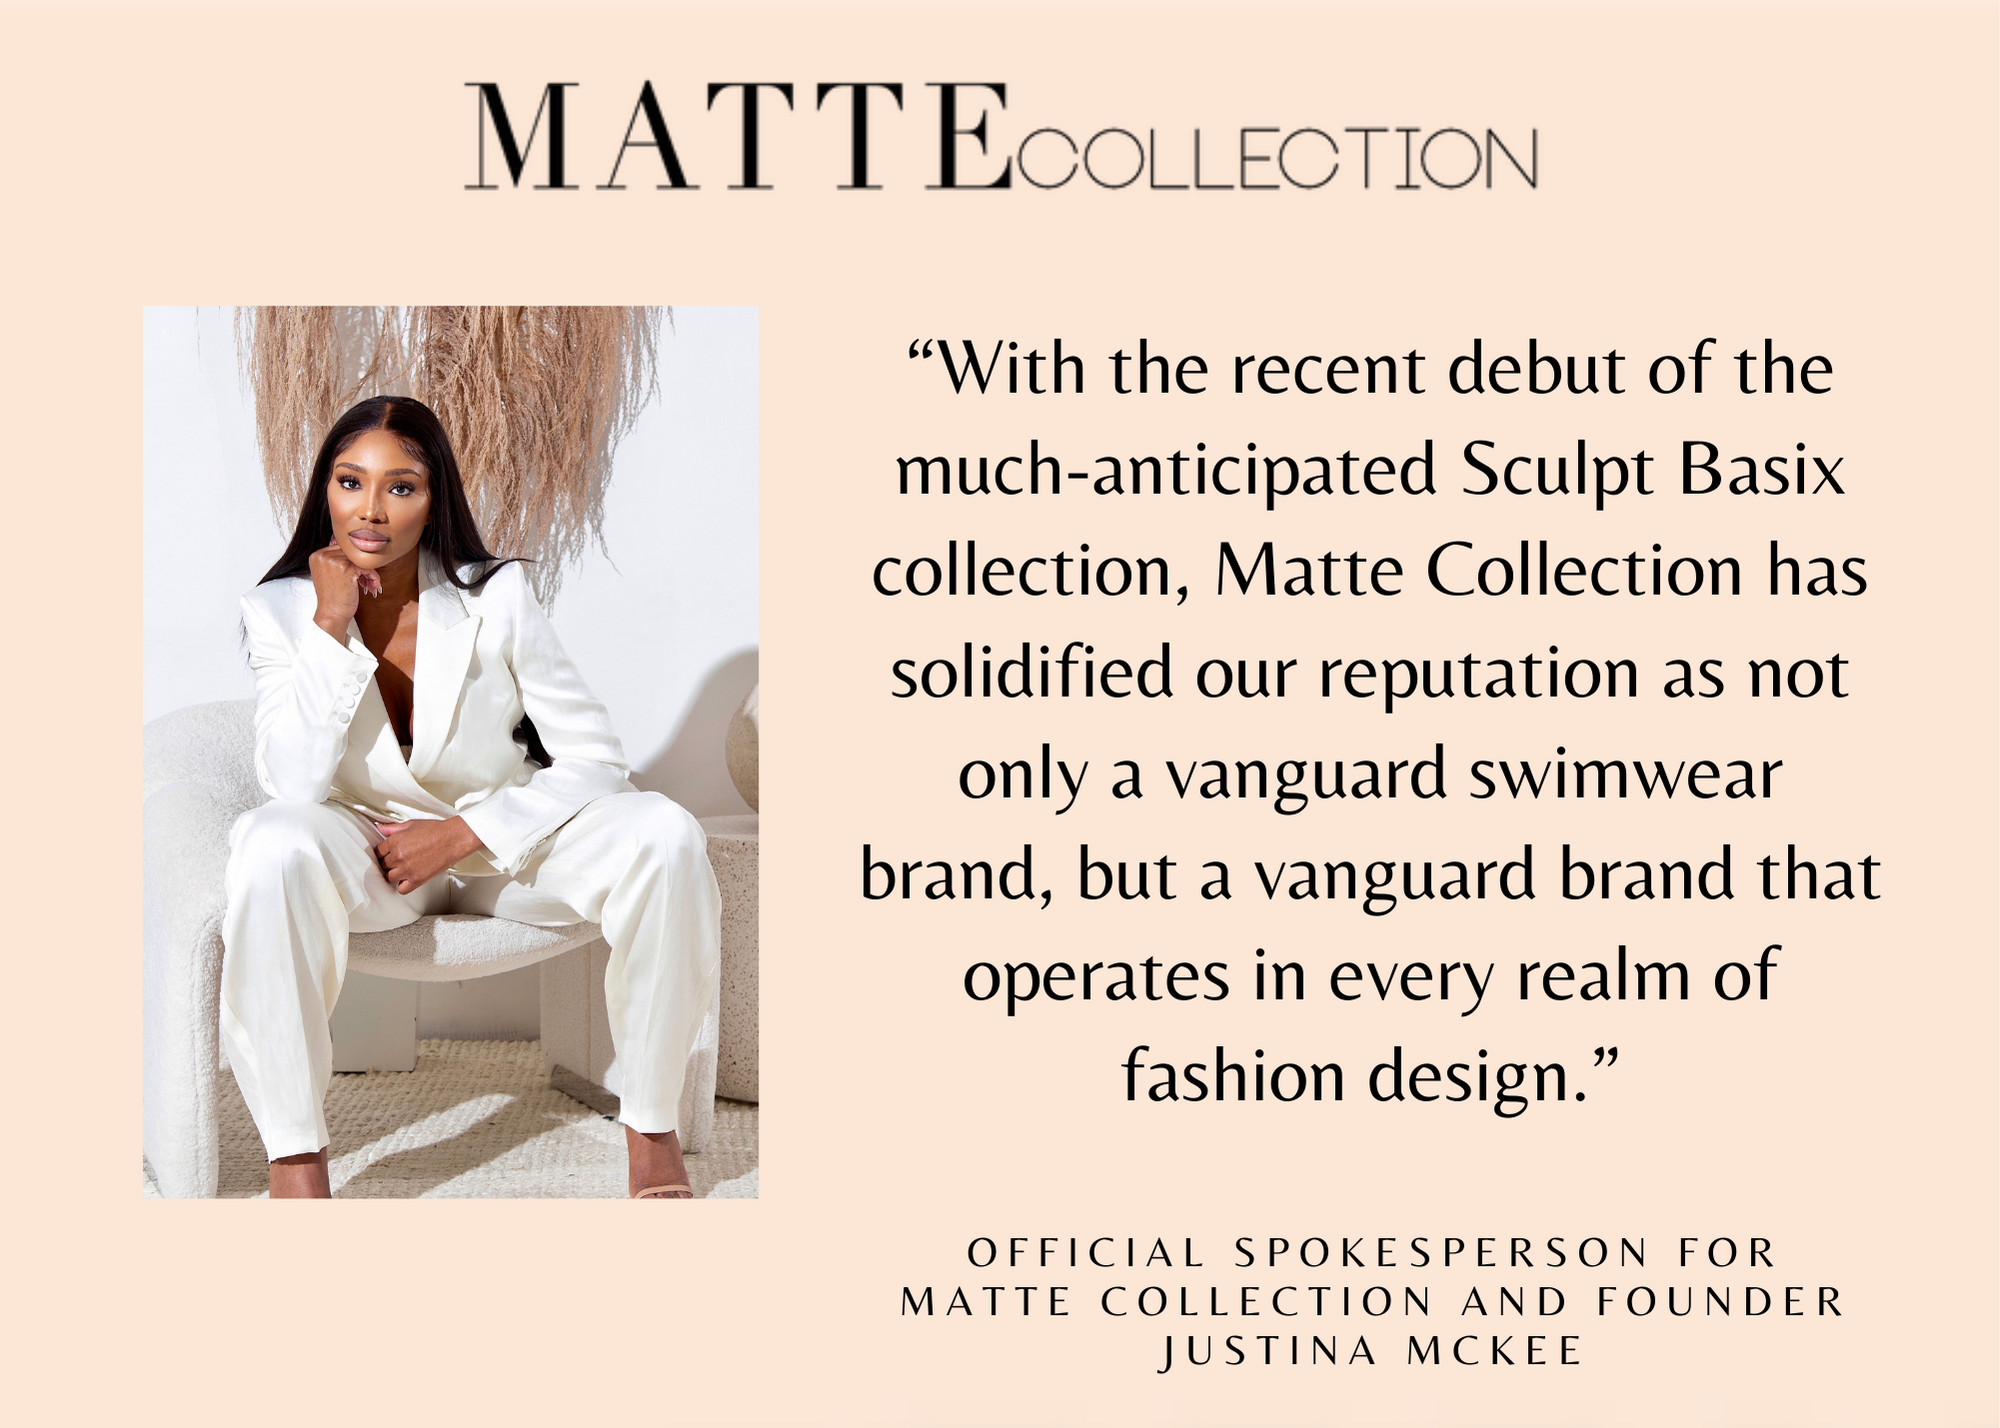 Matte Collection, Friday, May 6, 2022, Press release picture